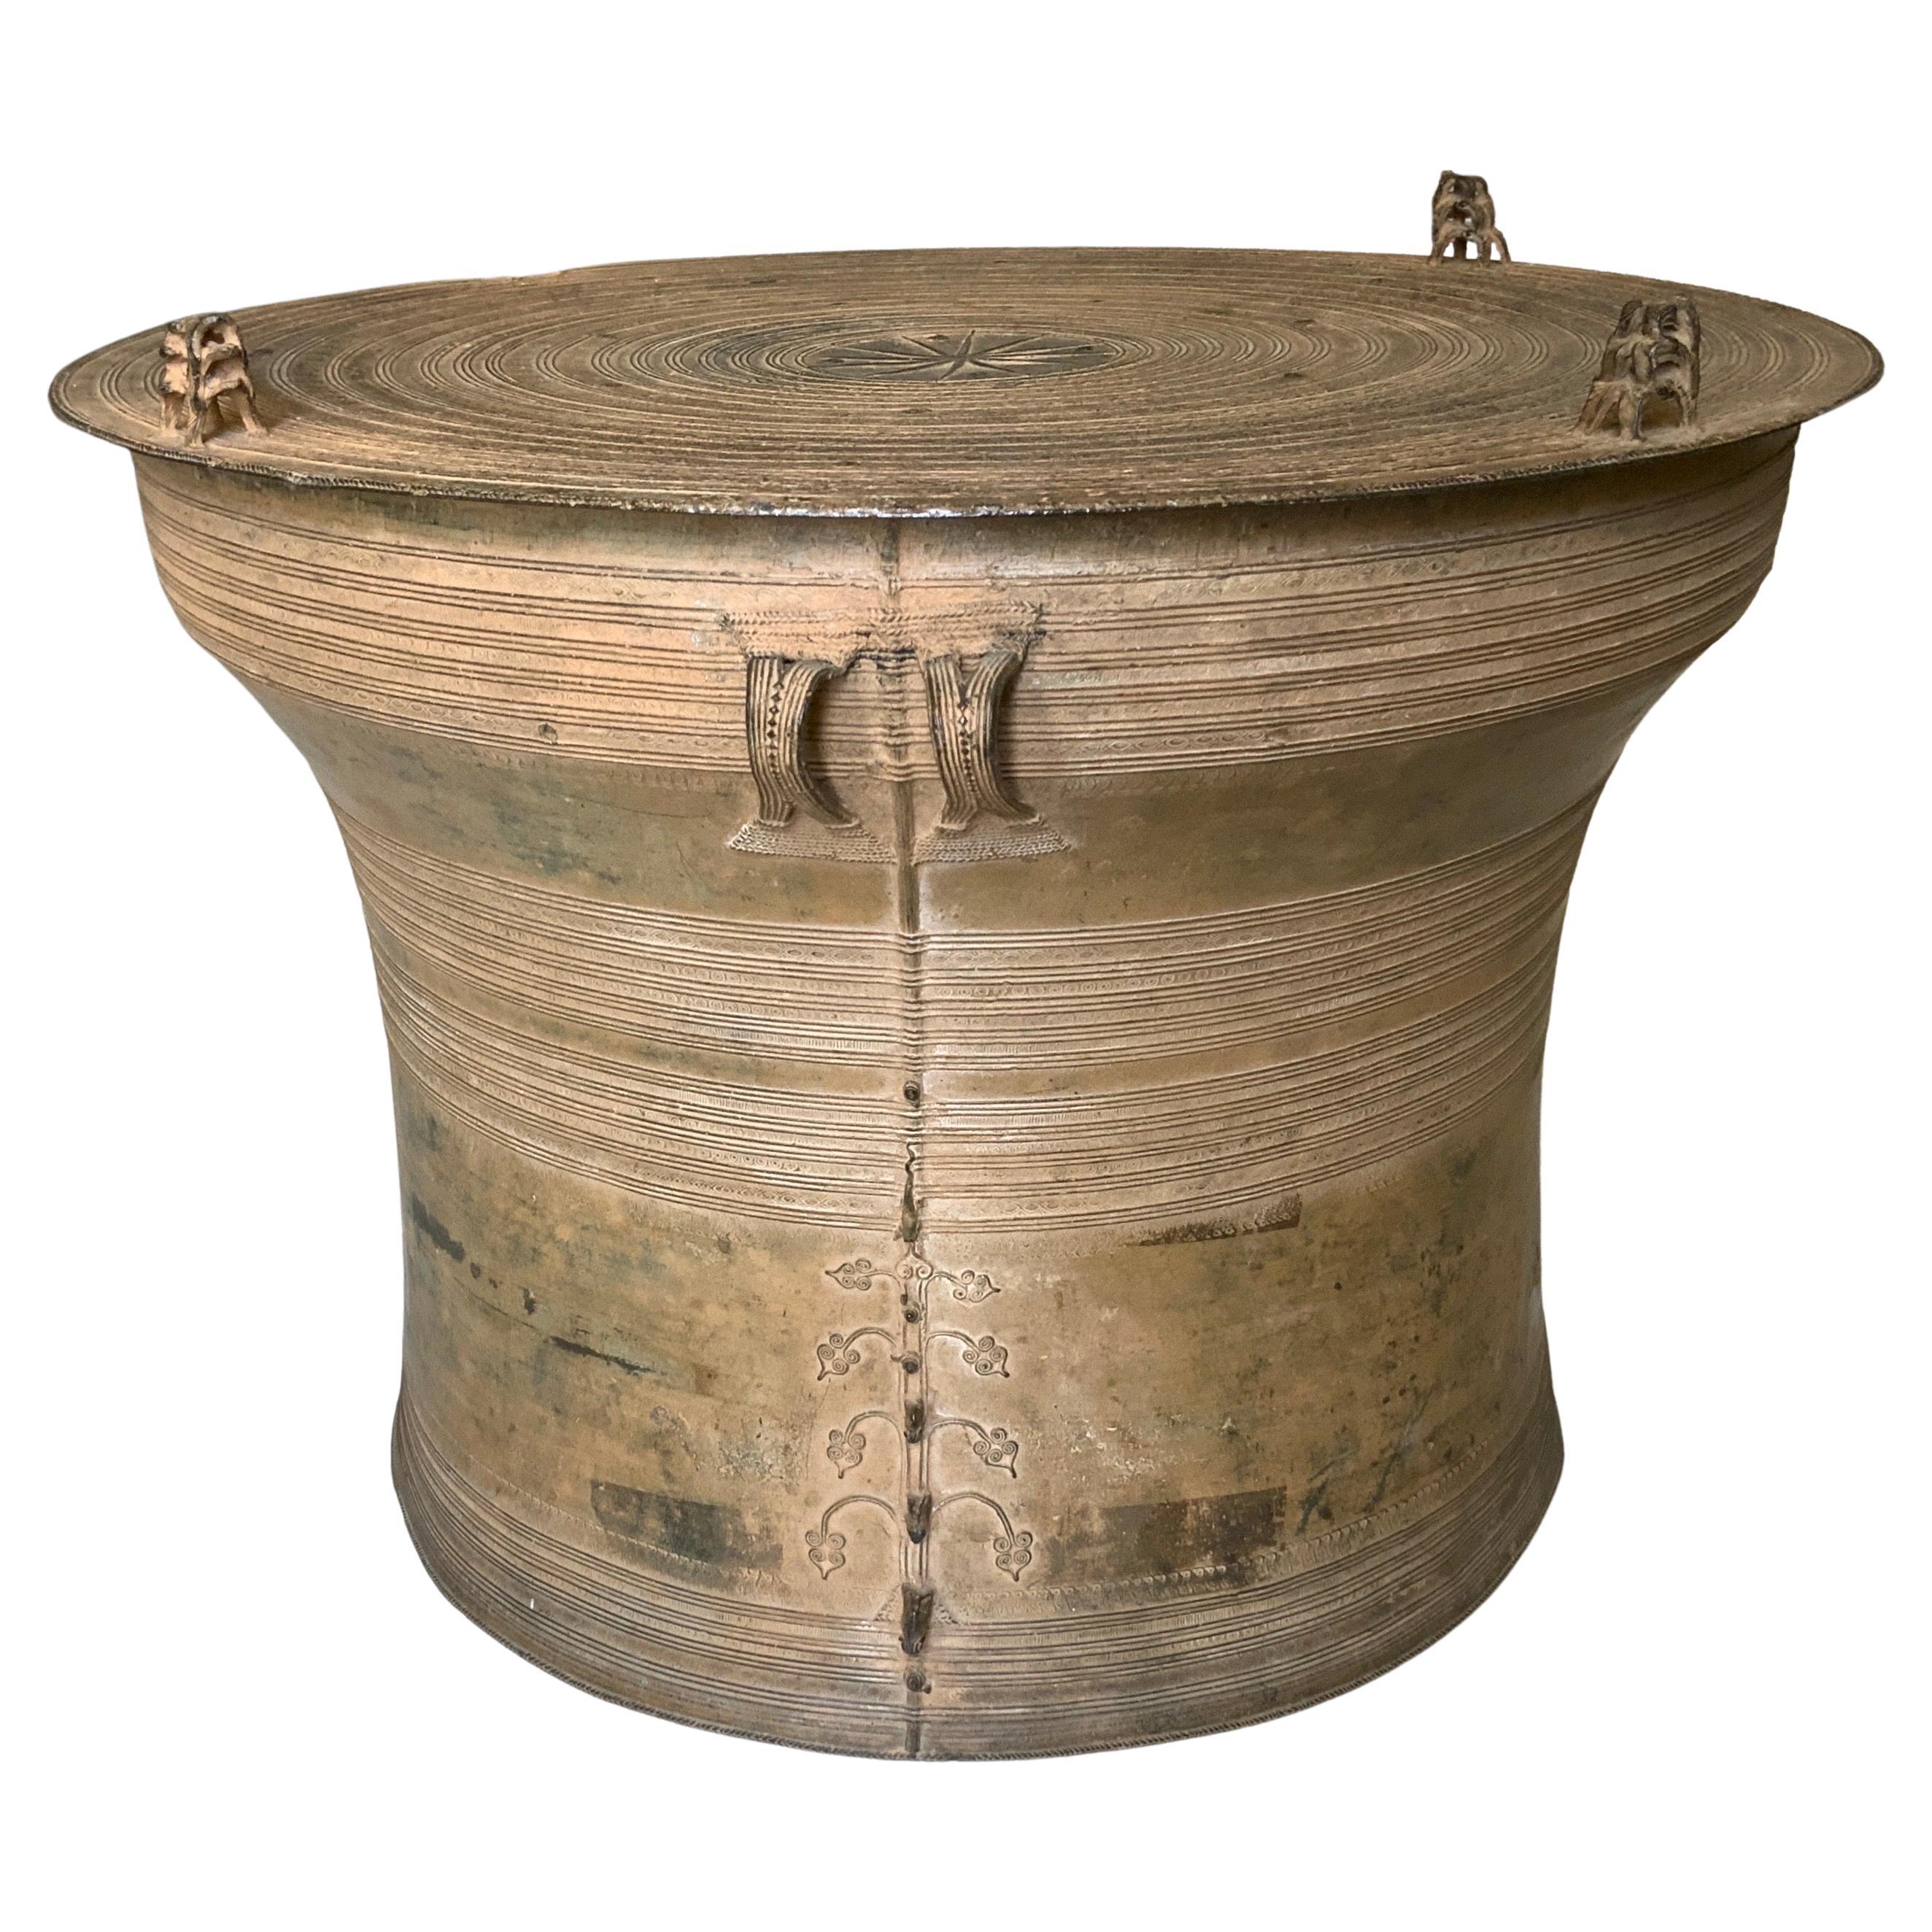 A beautiful and large Southeast Asia patinated original Bronze rain drum. 
Rain drums was used in Southeast Asian rituals. Their hollow Bronze shape transforms the sound of monsoon rains into music. This drum features detailed loop handles on sides